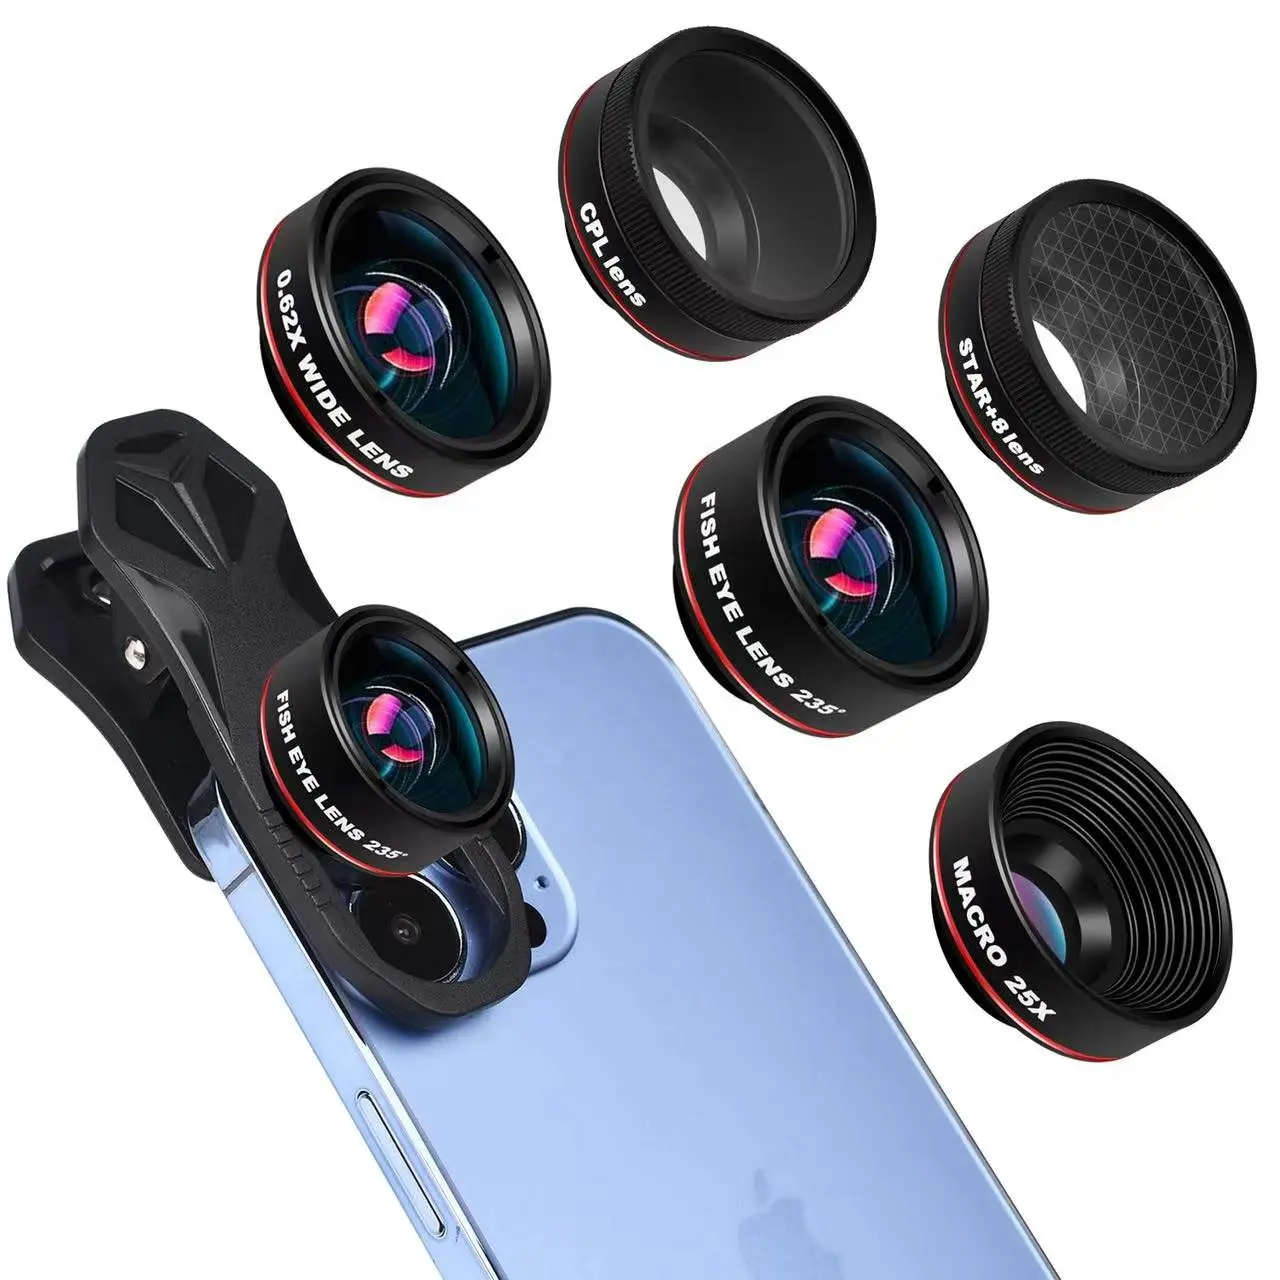 High quality 5 in 1 mobile lens gift products, applicable to Apple and universal smart phones